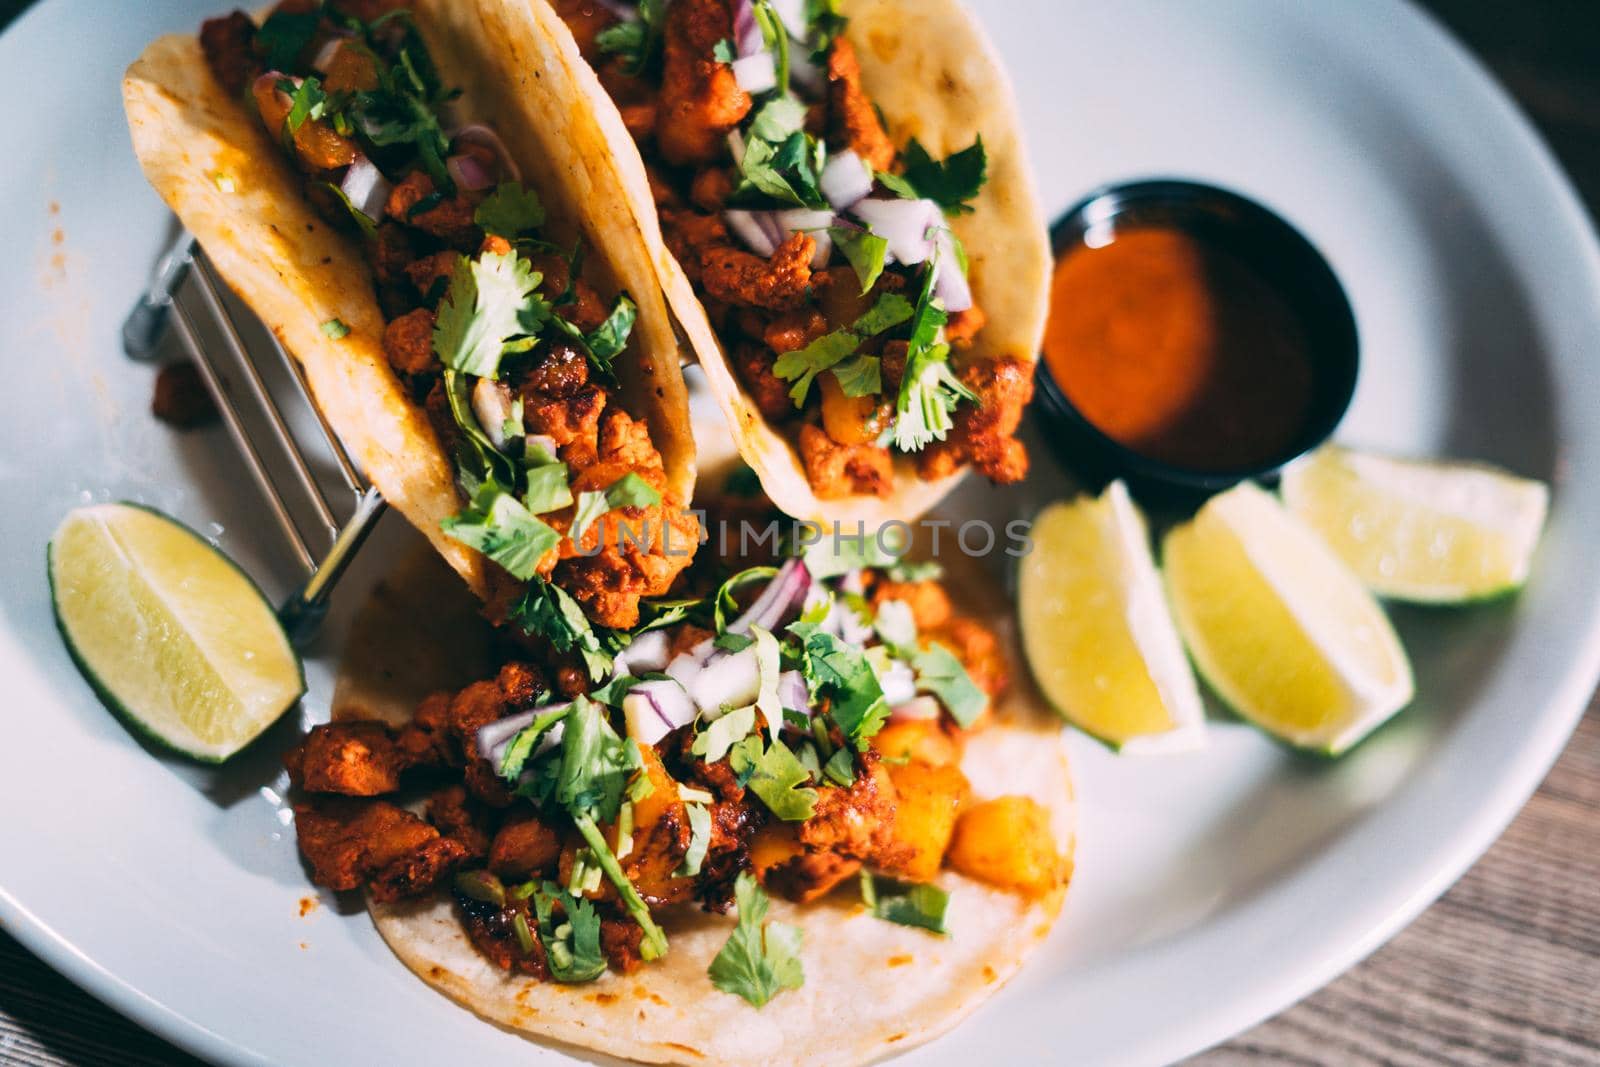 A plate of tacos and tortilla by castaldostudio